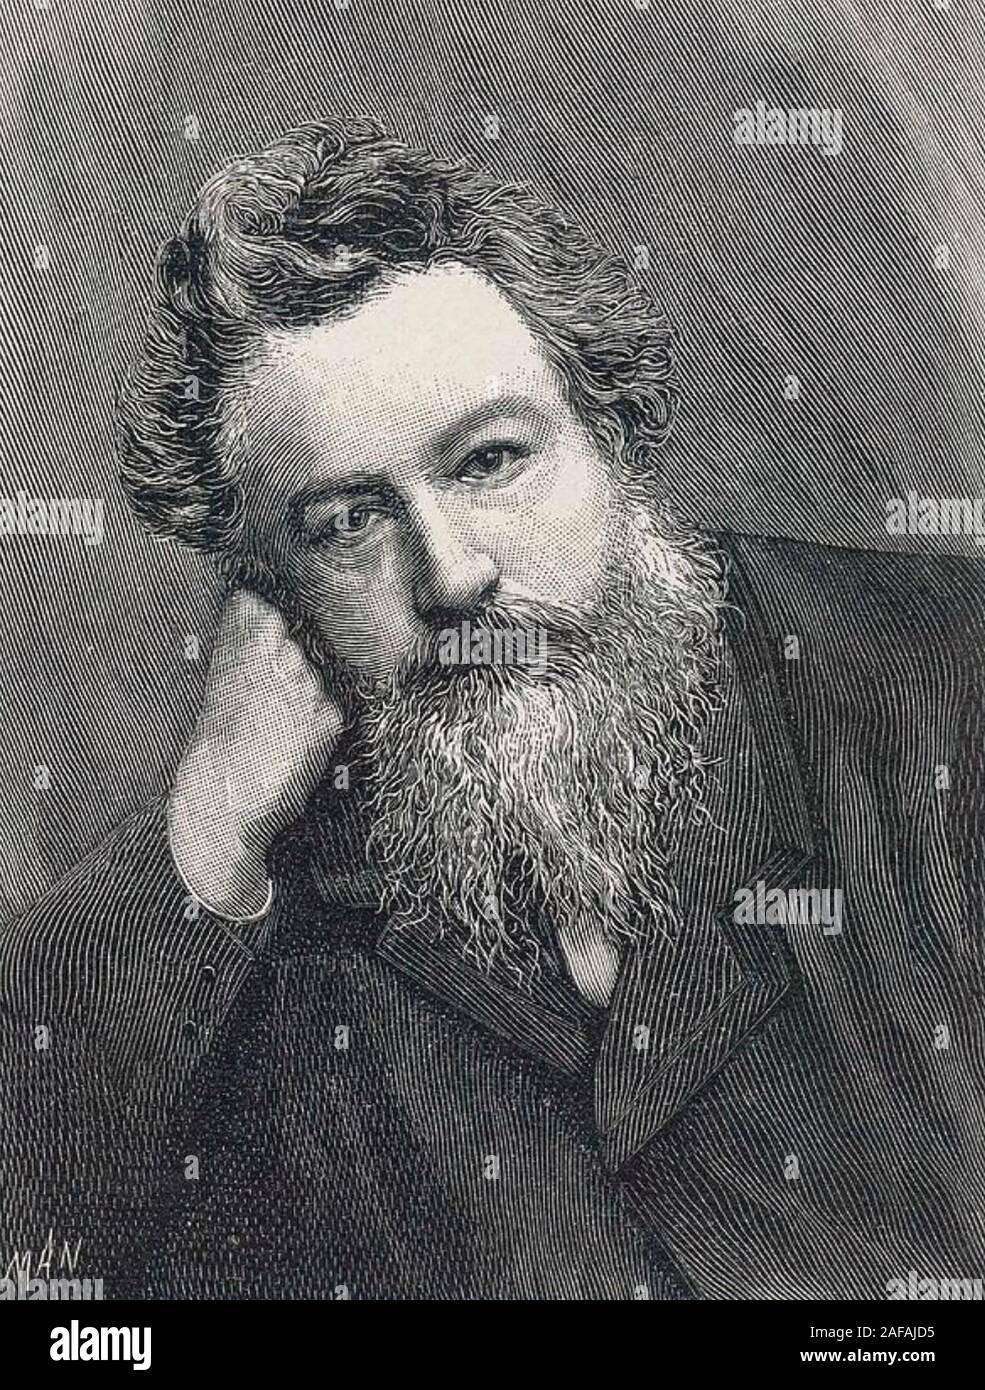 WILLIAM MORRIS  (1834-1896) English textile designer, poet and socialist activist by Frederick Hollyer in 1888 Stock Photo